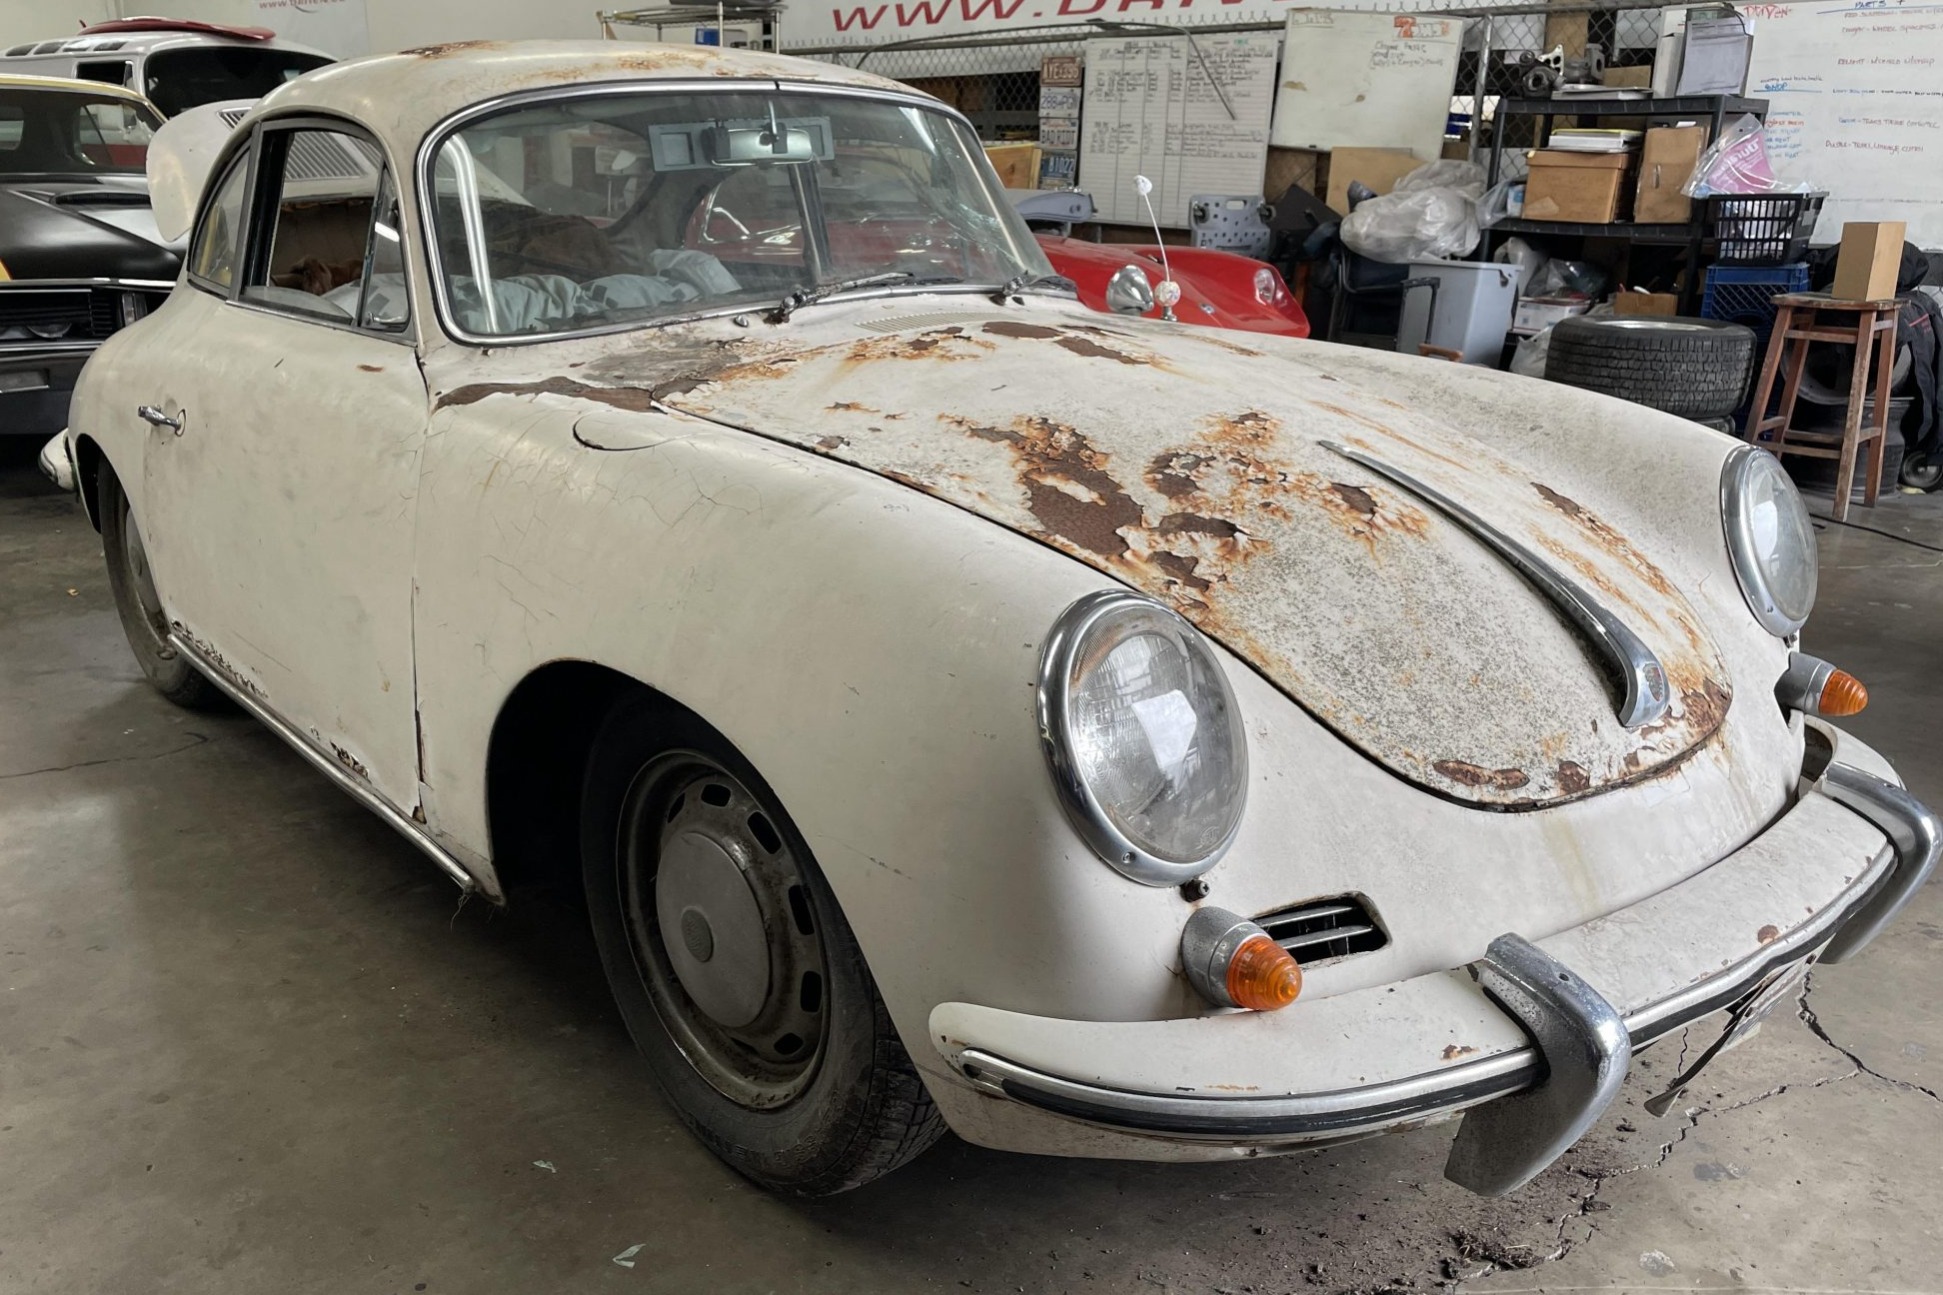 Used 1964 Porsche 356C Coupe Project Review